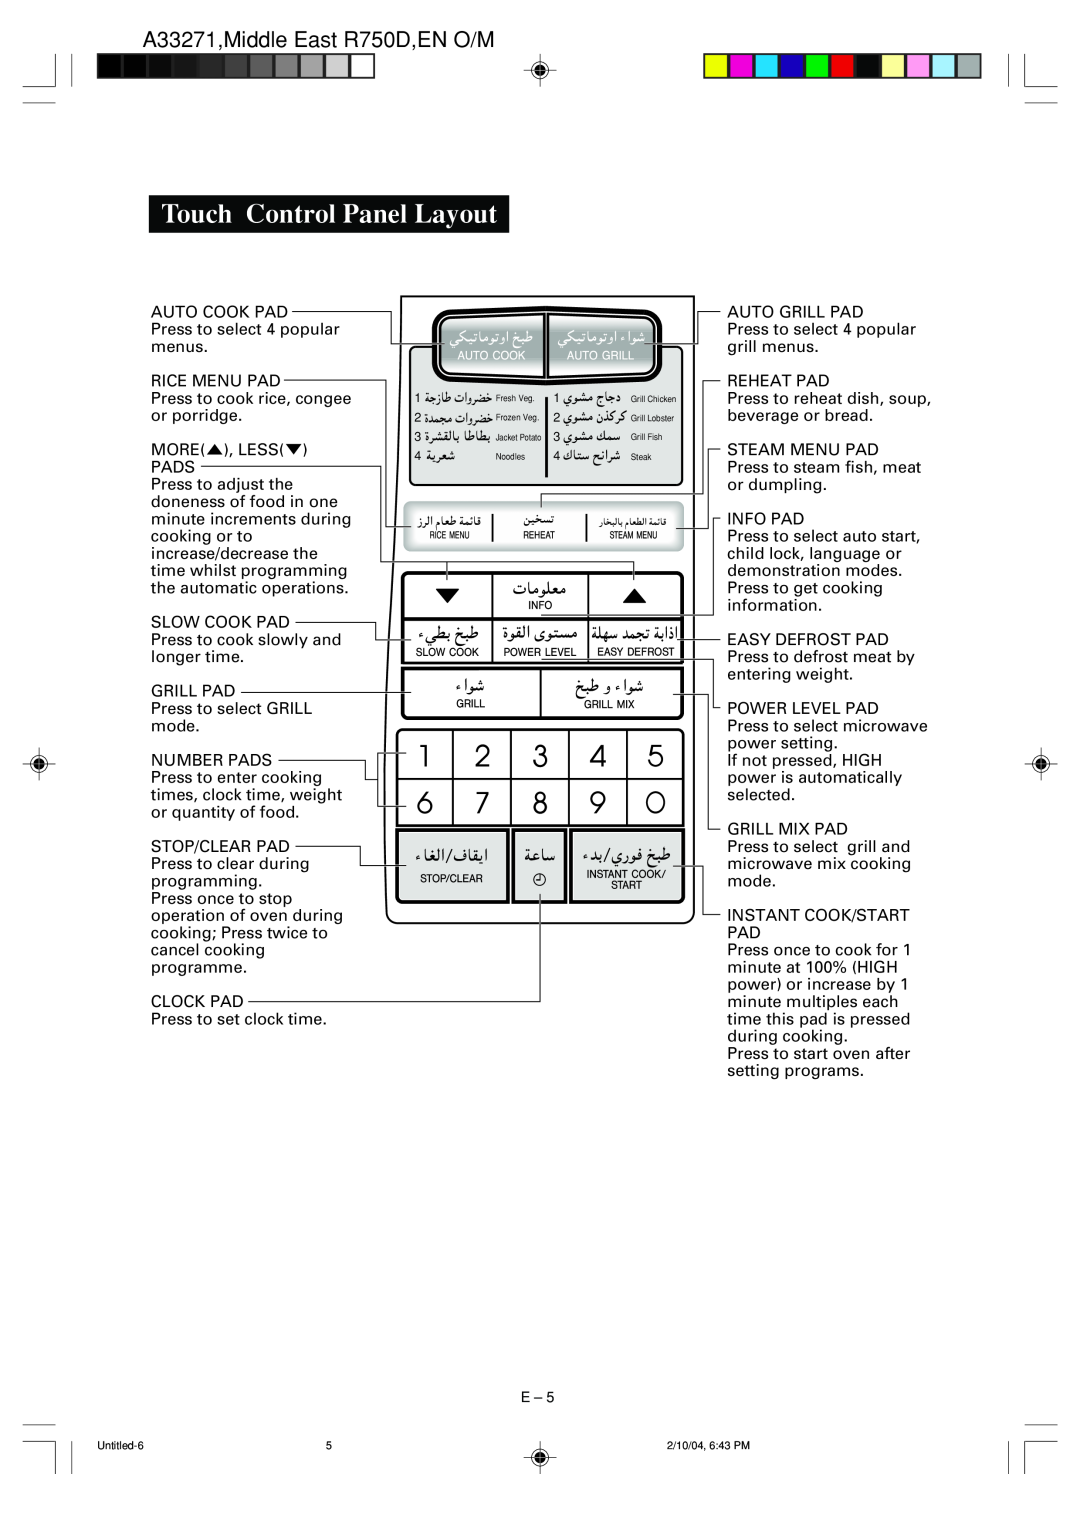 Sharp R-750D Touch Control Panel Layout, A33271,Middle East R750D,EN O/M, Fresh Veg, Grill Lobster, Grill Fish, Noodles 